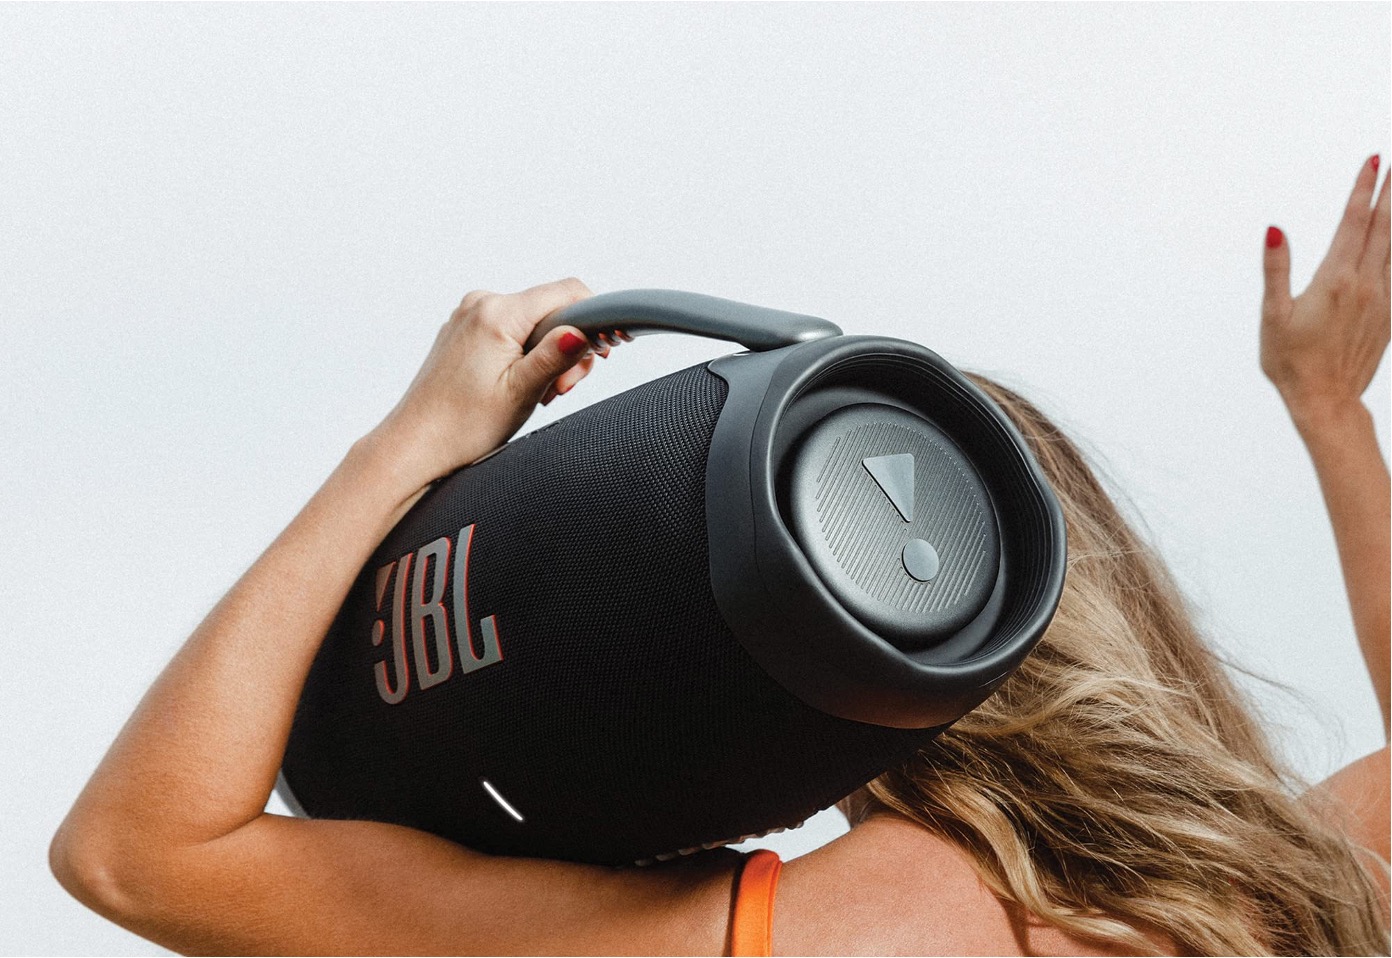 JBL Boombox 2: Is it worth the upgrade?